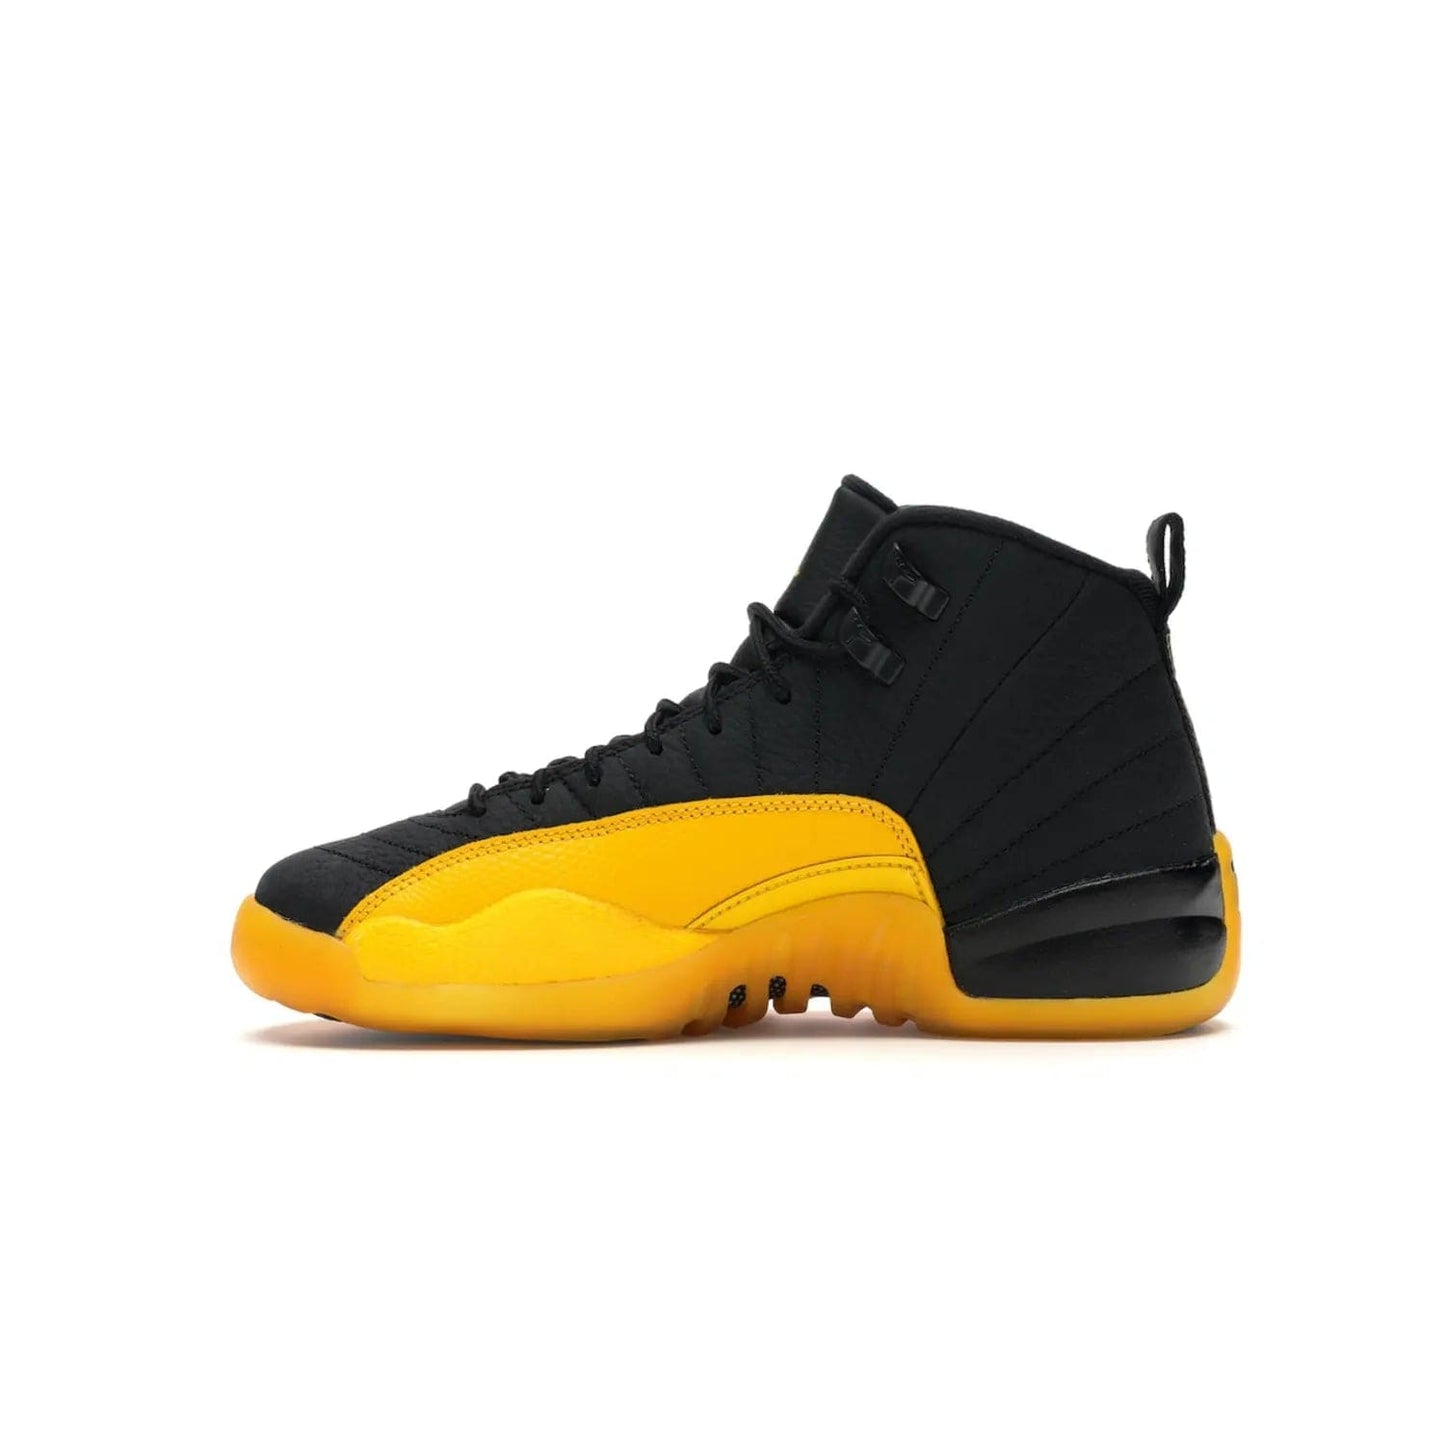 Jordan 12 Retro Black University Gold (GS) - Image 19 - Only at www.BallersClubKickz.com - Upgrade your kid's shoe collection with the Jordan 12 Retro Black University Gold. With classic style, black tumbled leather upper, and University Gold accents, it's a great summer look. Out July 2020.